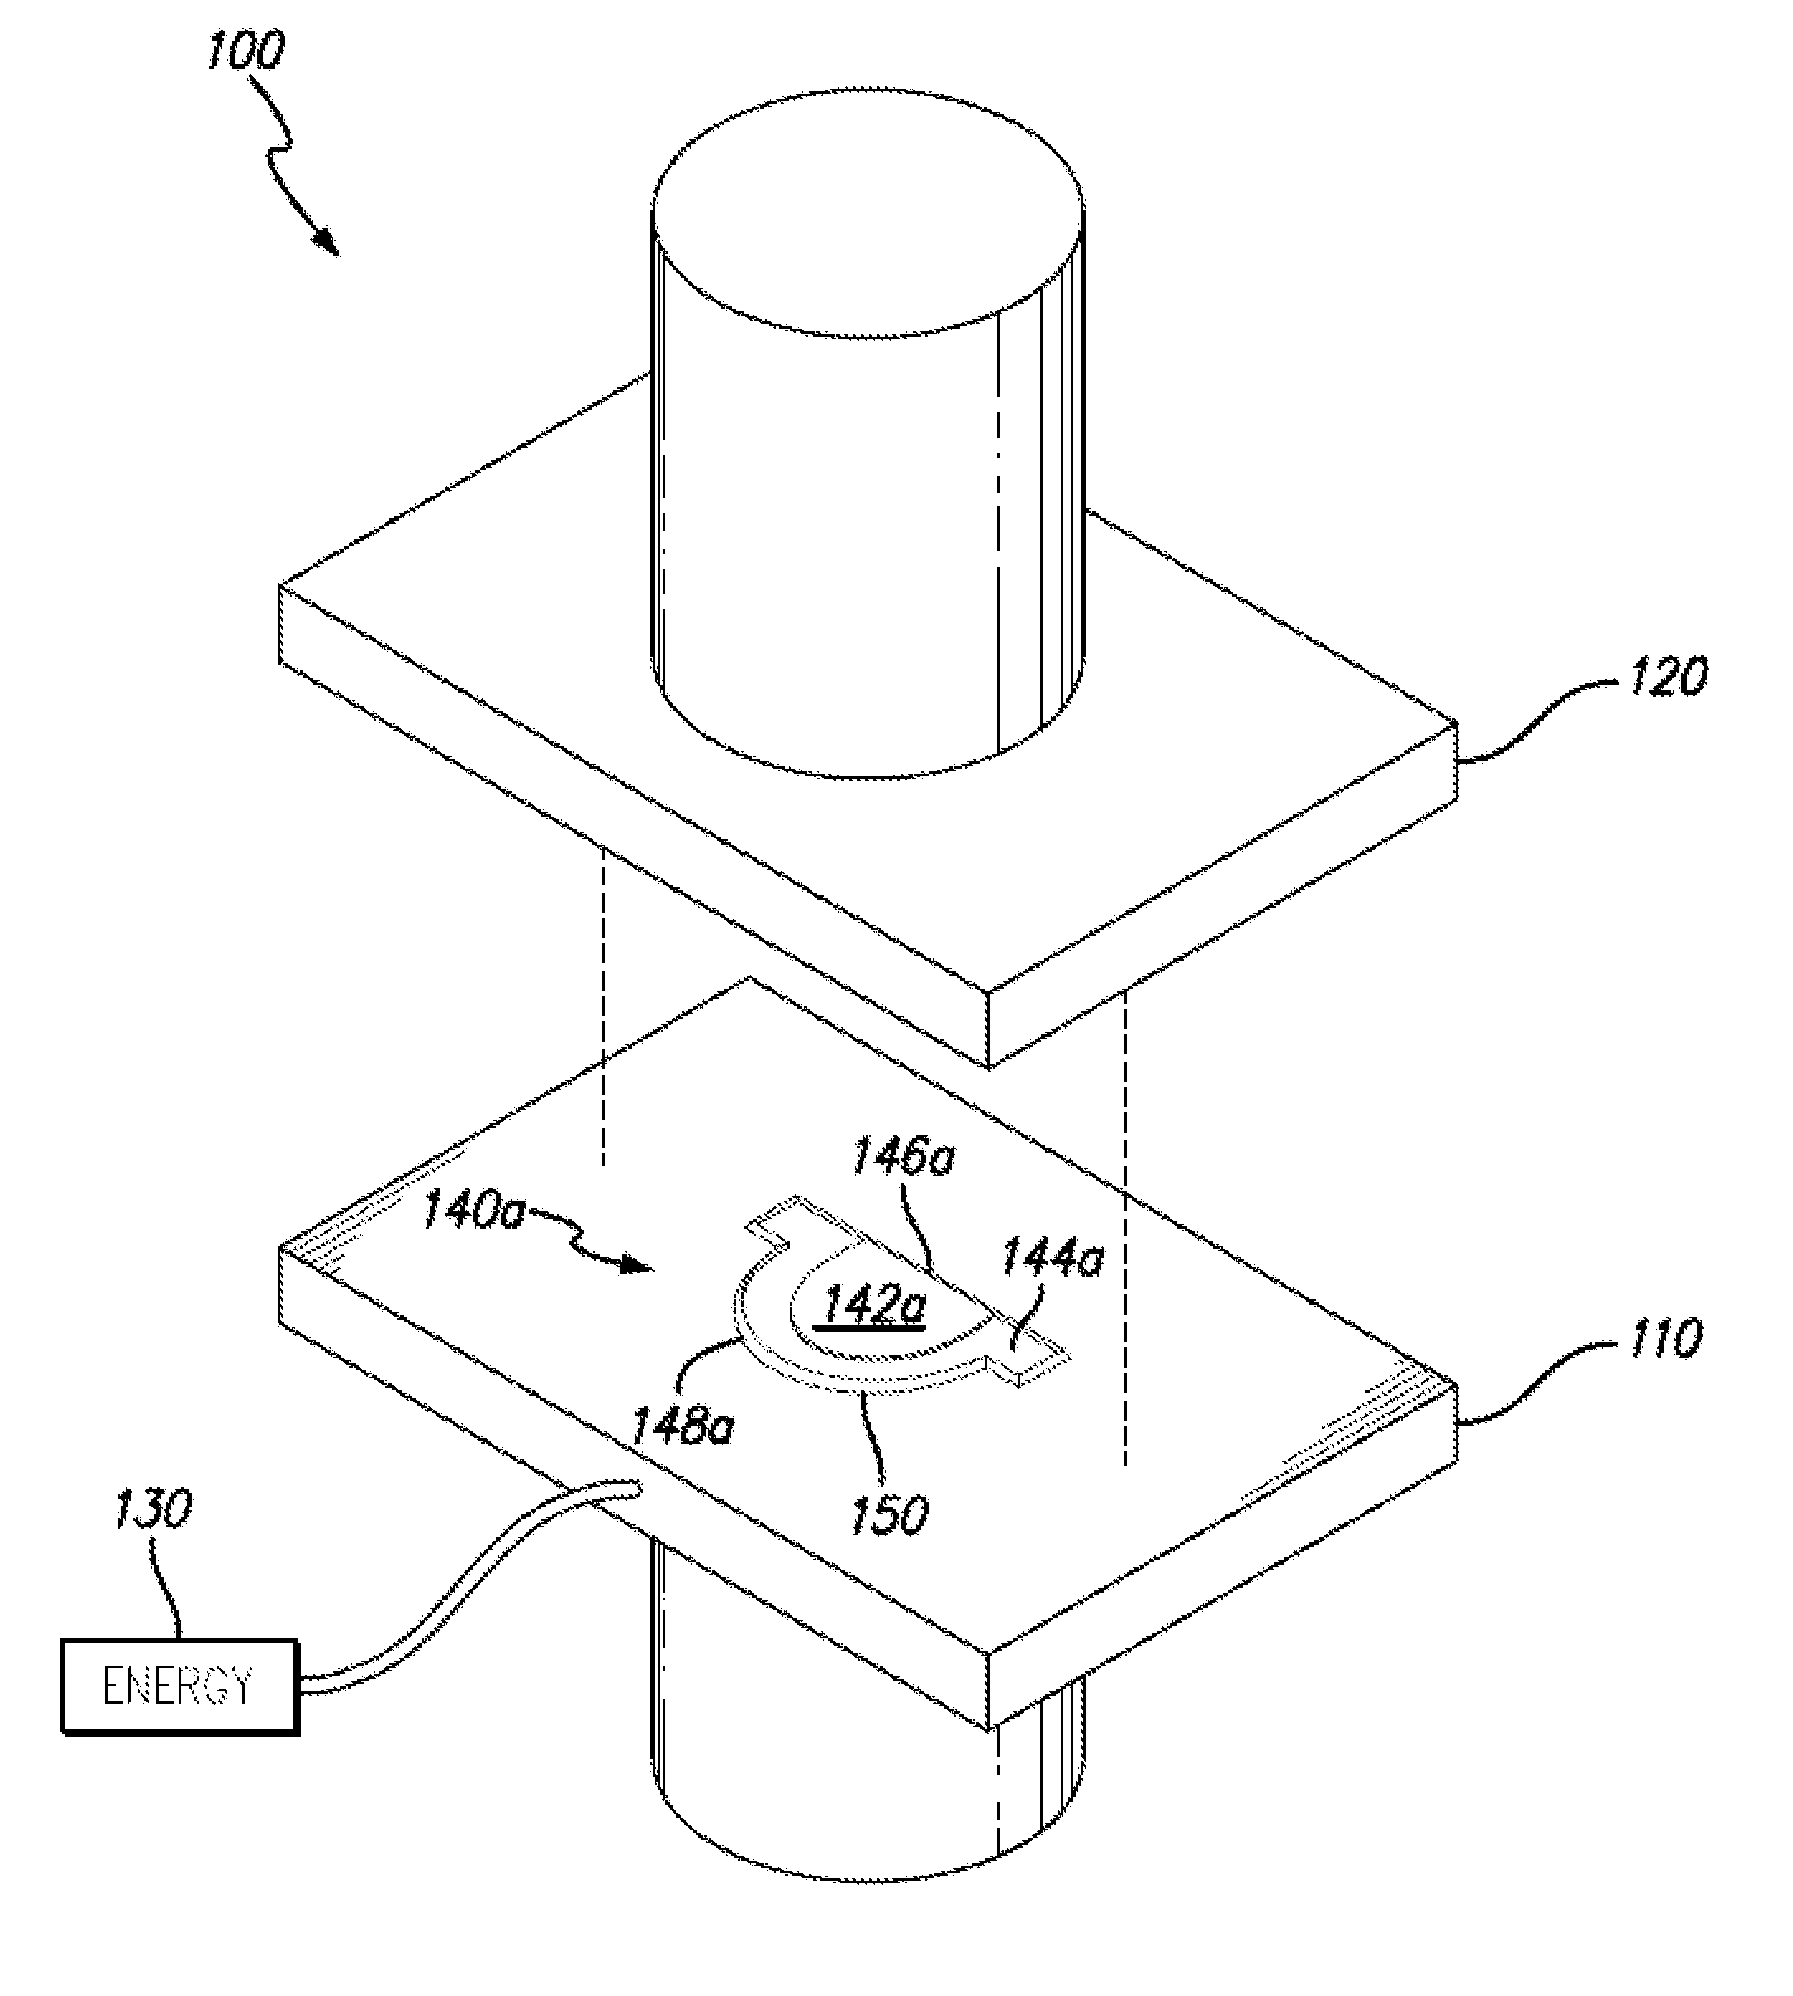 Method and apparatus for preparing a contoured biological tissue